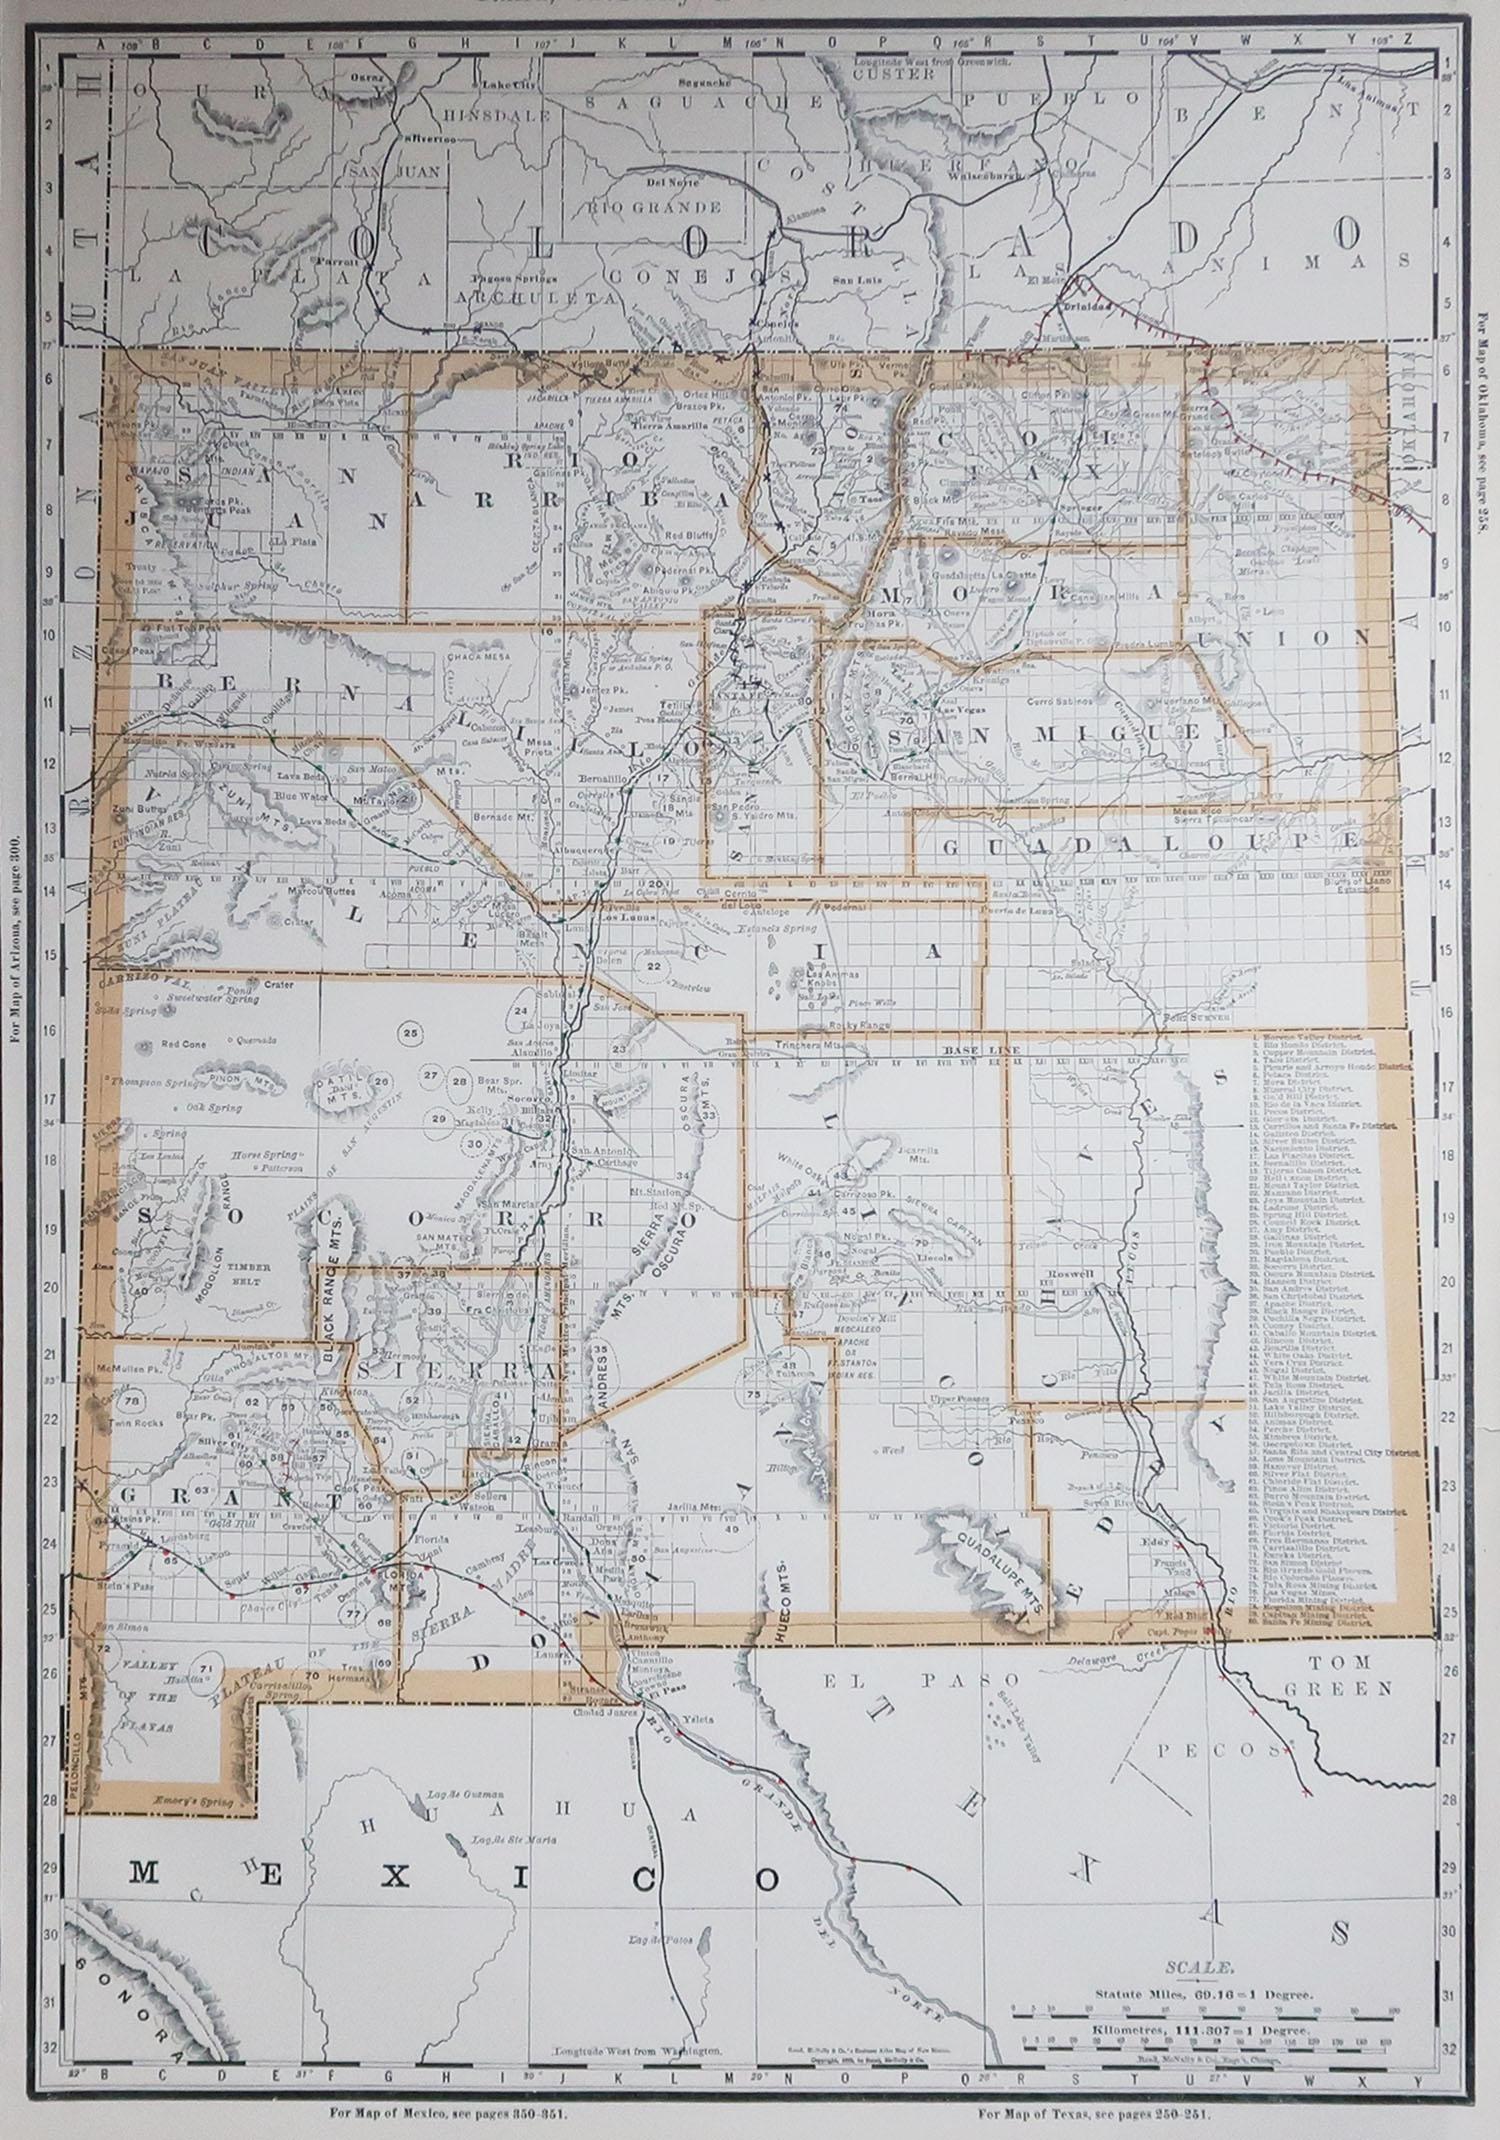 Fabulous map of New Mexico

Original color

By Rand, McNally & Co.

Published, 1894

Unframed

Free shipping.